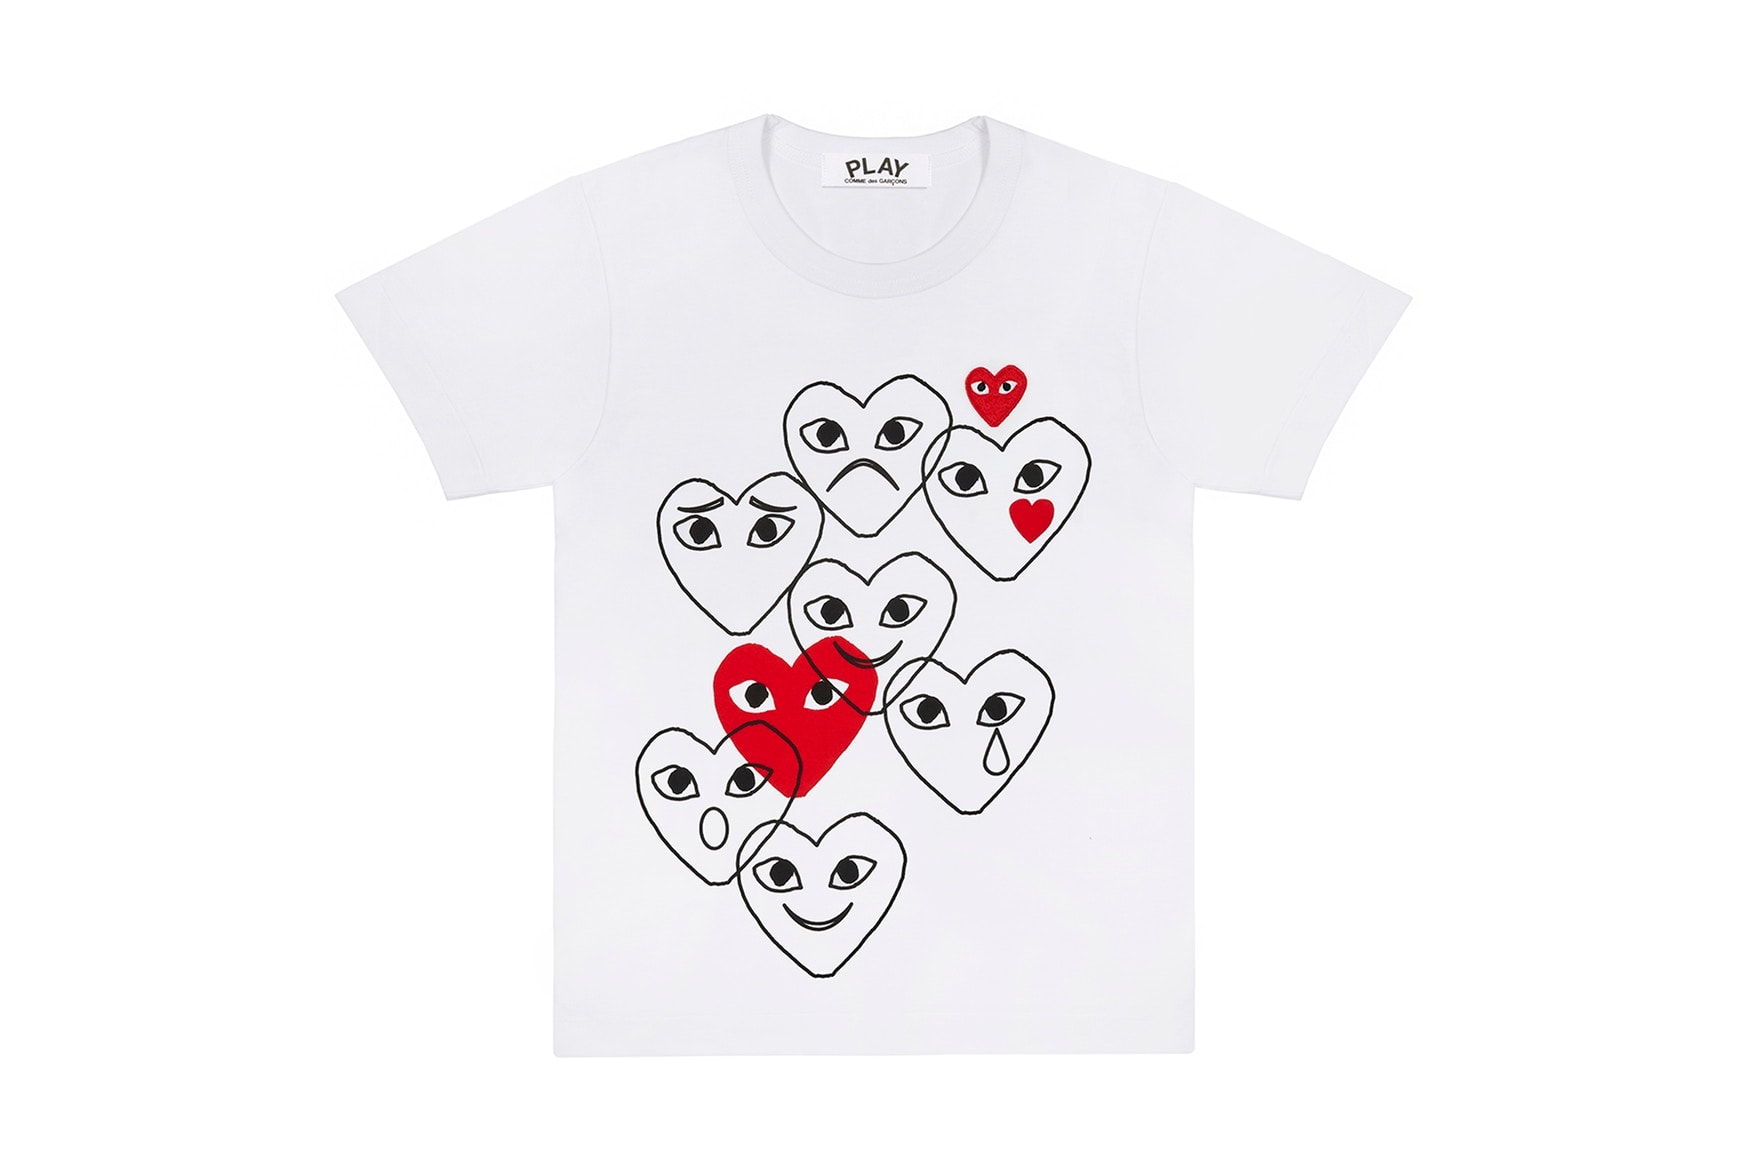 COMME des GARÇONS PLAY Emoji Play T-Shirt Hearth With Eyes Red Black White